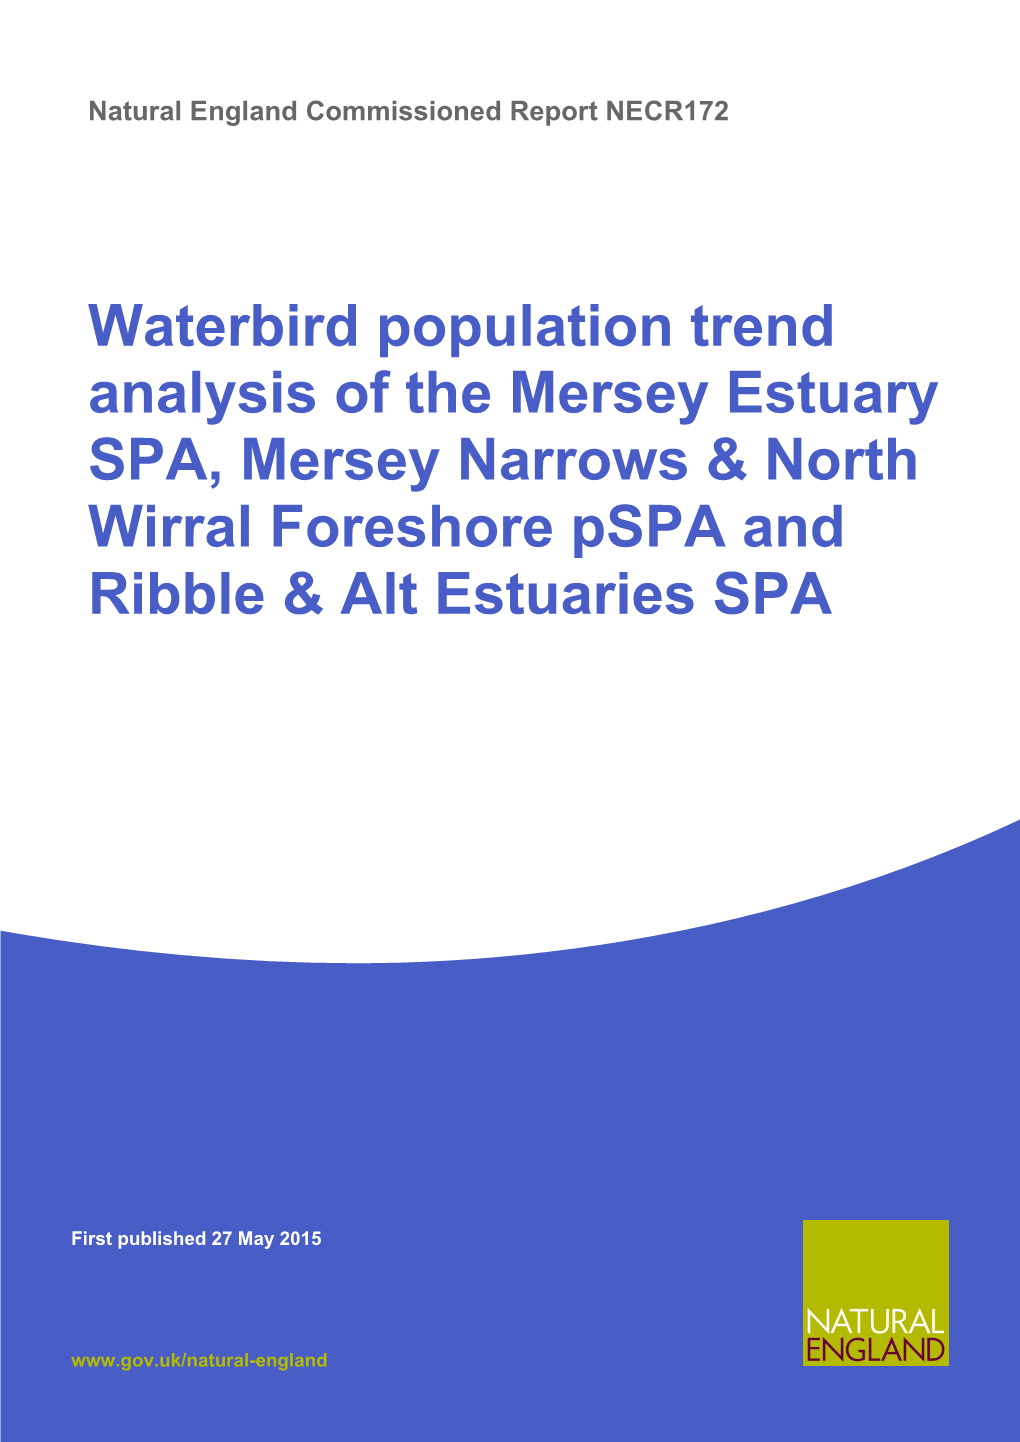 Waterbird Population Trend Analysis of the Mersey Estuary SPA, Mersey Narrows & North Wirral Foreshore Pspa and Ribble & Alt Estuaries SPA